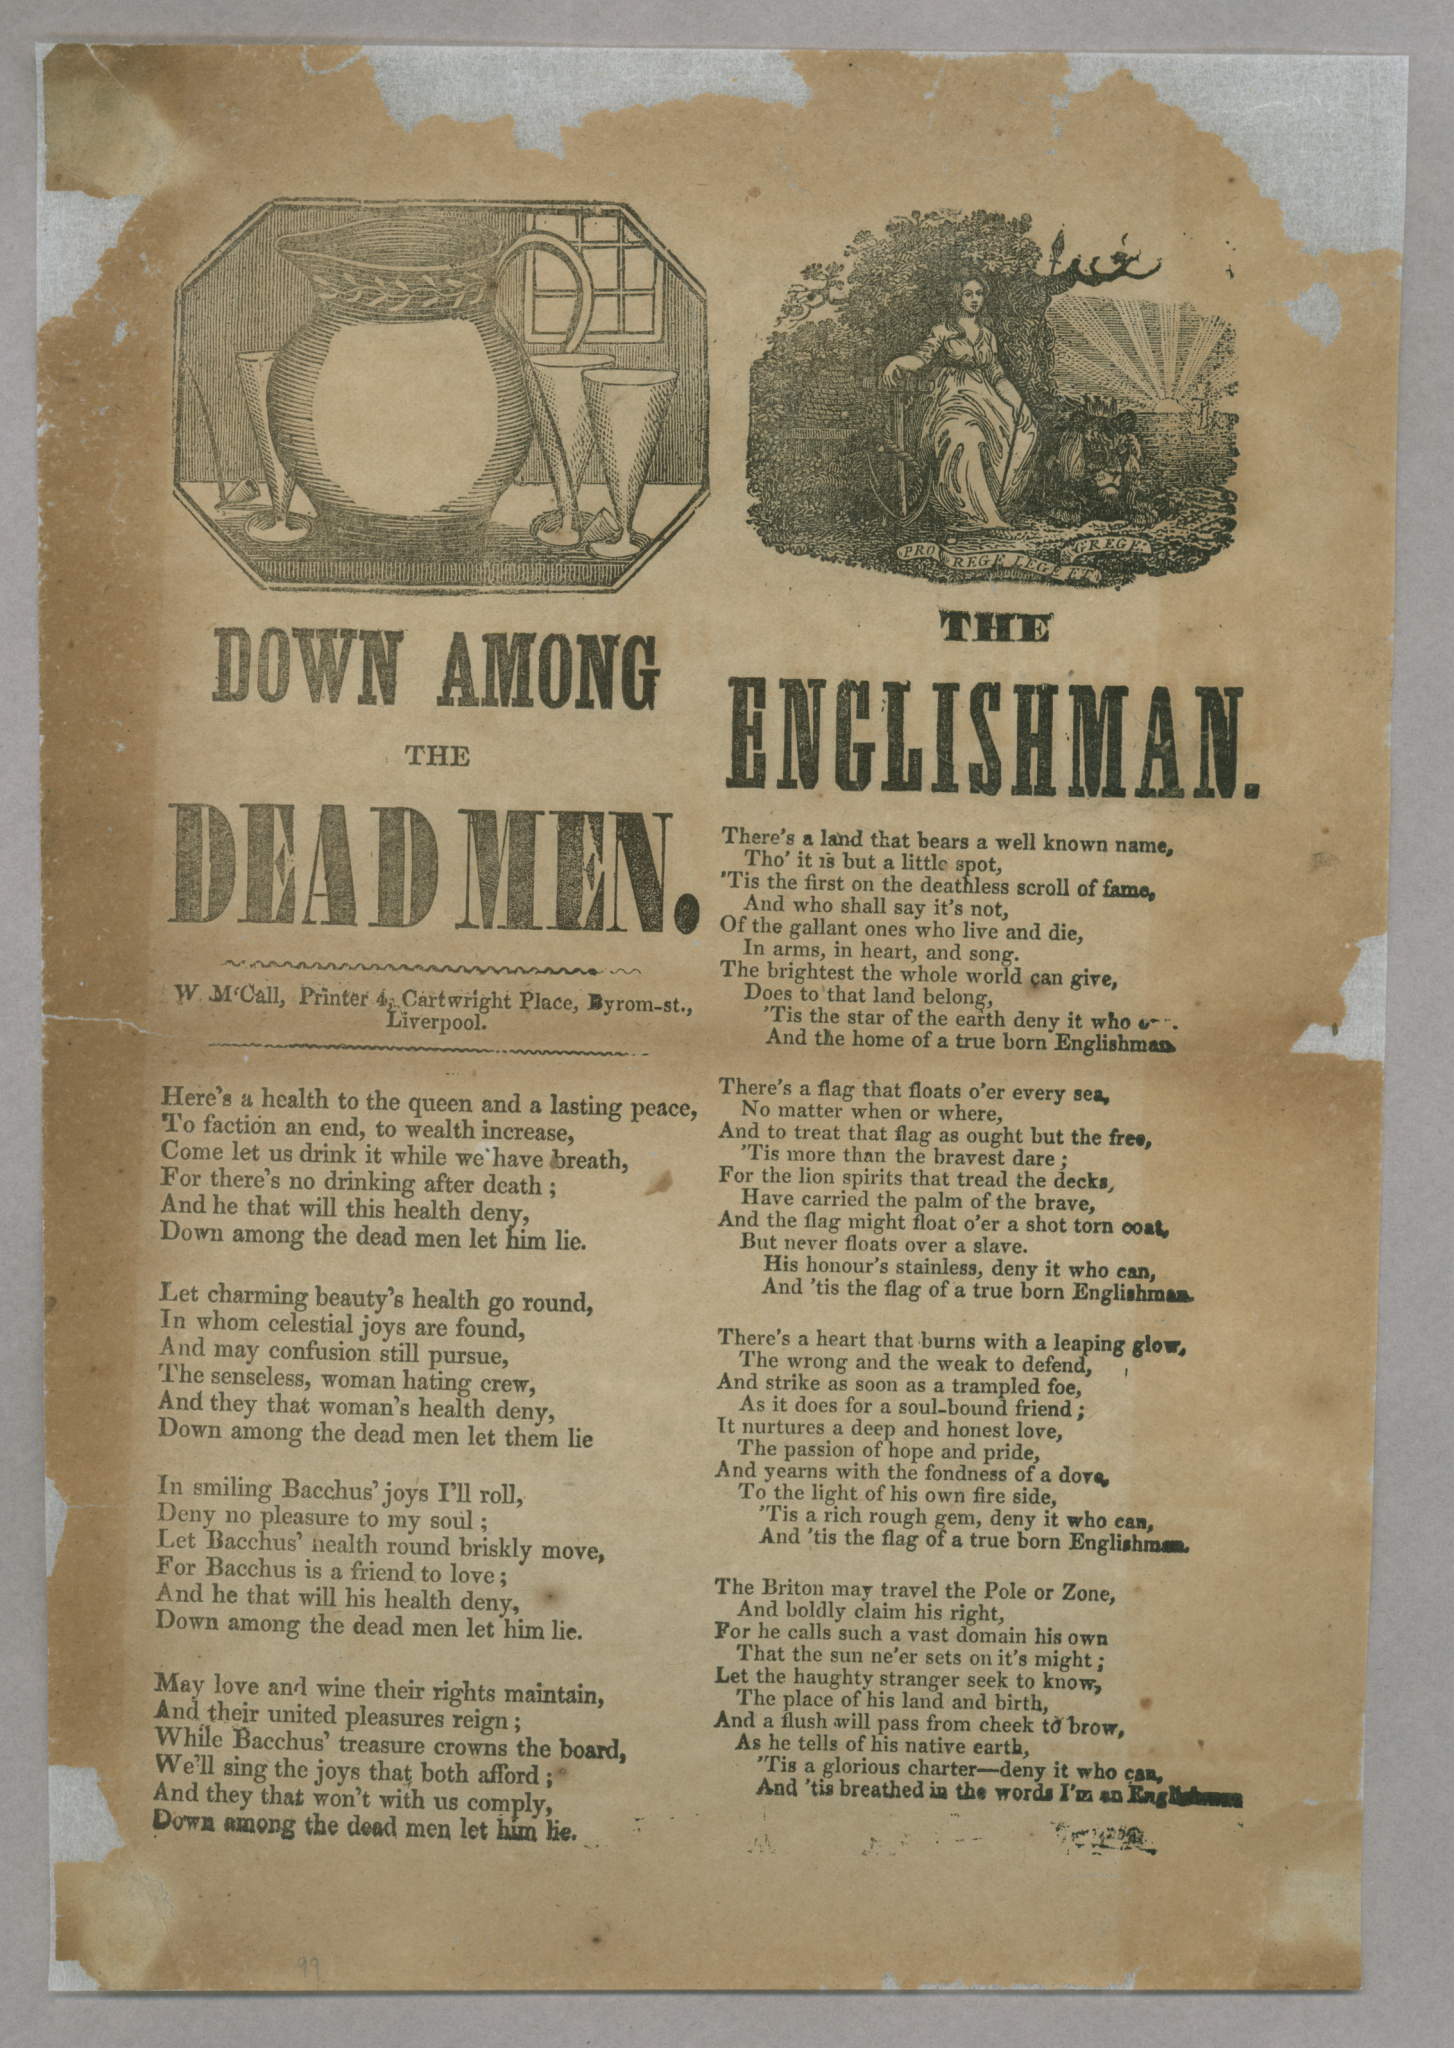 &quot;Down Among the Dead Men,&quot; and &quot;The Englishman&quot;